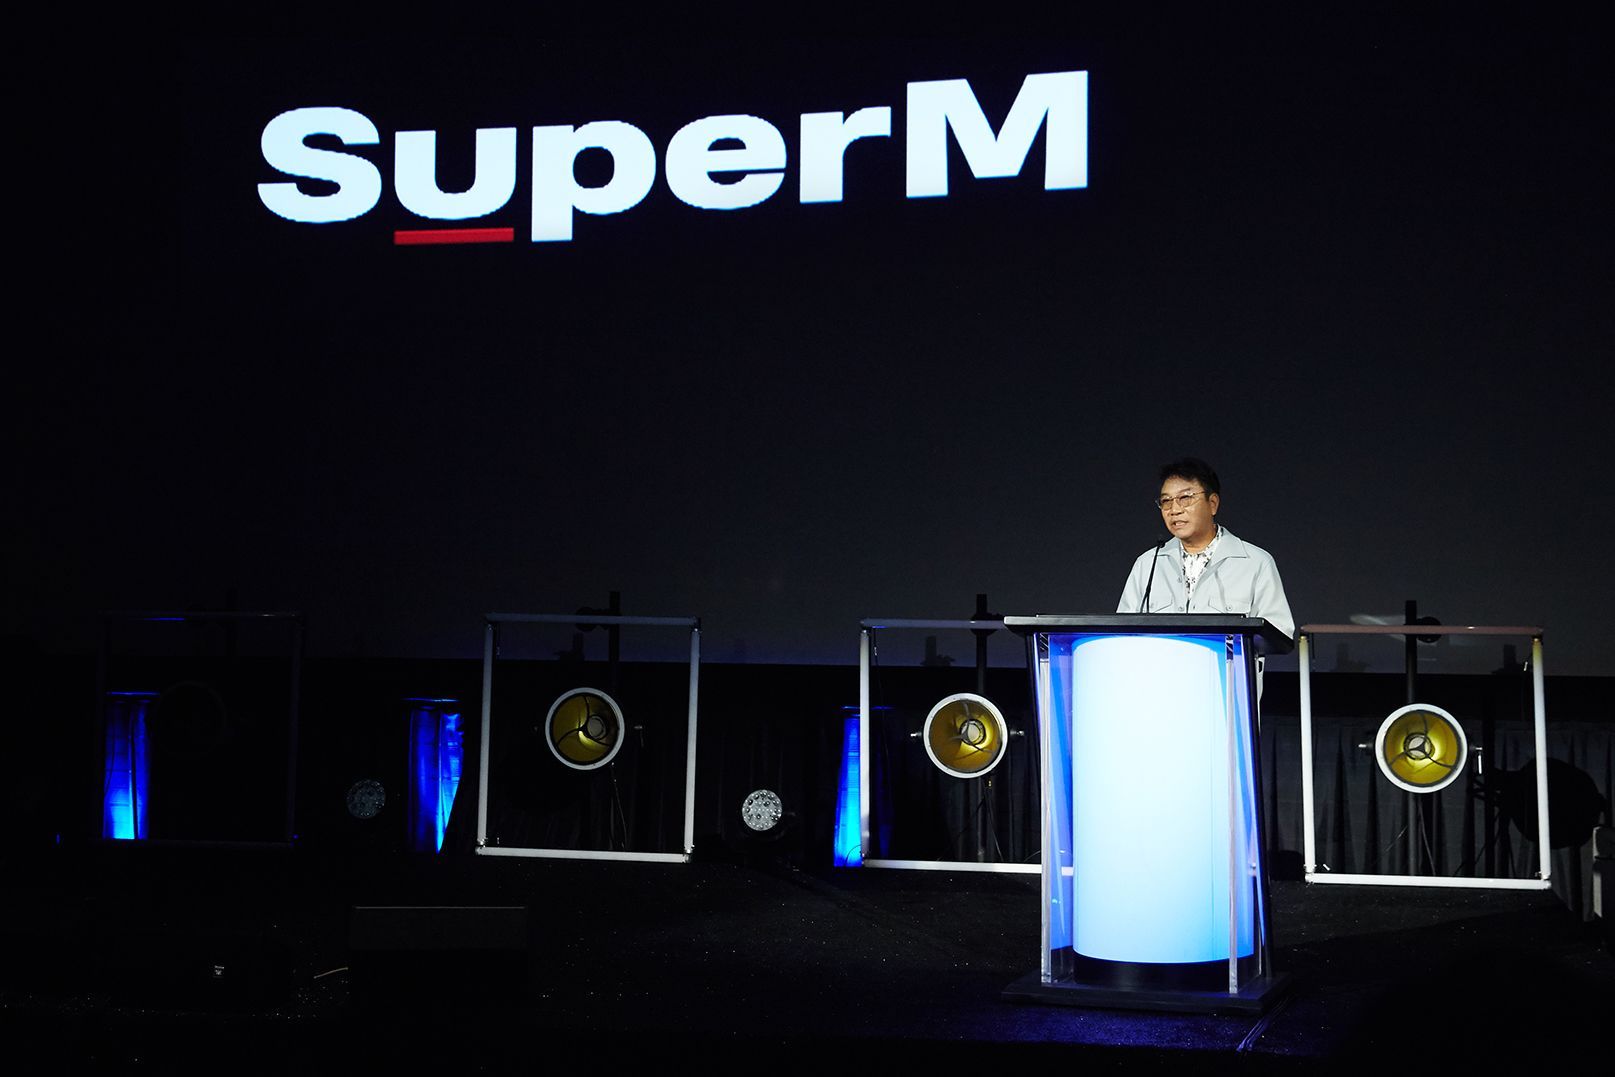 SM Chairman Lee Soo-man announced the new challenge as a producer at the Capitol Congress 2019 at the United States of Americas Arkwright Theater on the 7th (local time).SuperM, which consists of seven outstanding The Artists, will show differentiated music, he said. We will show the core value of visual K-pop, such as performances and fashion, which are different from the members outstanding dance, vocals and rap skills.In particular, he emphasized SM Music Performance (SMP).We have created a system that casts, trains and debuts the artists, and have built them as the best system for the best results for many years, SuperM said. SuperM is the result of SMP philosophy, a comprehensive art content.I am confident that it will give me a bigger surprise than expected. SM has taken a safe path: a member-building that naturally attracts K-pop fans from South Korea, United States of America and China.Taemin, Baekhyun and Kai each acted as SHINee and EXO, winning the Grand Prize in Korea and establishing themselves as a global The Artist.Tae Yong and Mark are making their debut announcement of United States of America through NCT 127 and are making word of mouth on social media.Lucas and Ten, who were introduced to Korea first by NCT, debuted in China as a wait-by and are attracting attention as a limited-time newcomer.The global fan reaction of those who have been together with SuperM is hot since the debut announcement.At the same time, it was difficult to create a teamwork of SuperM, which differentiates itself from existing groups, and to continue synergy with fans.